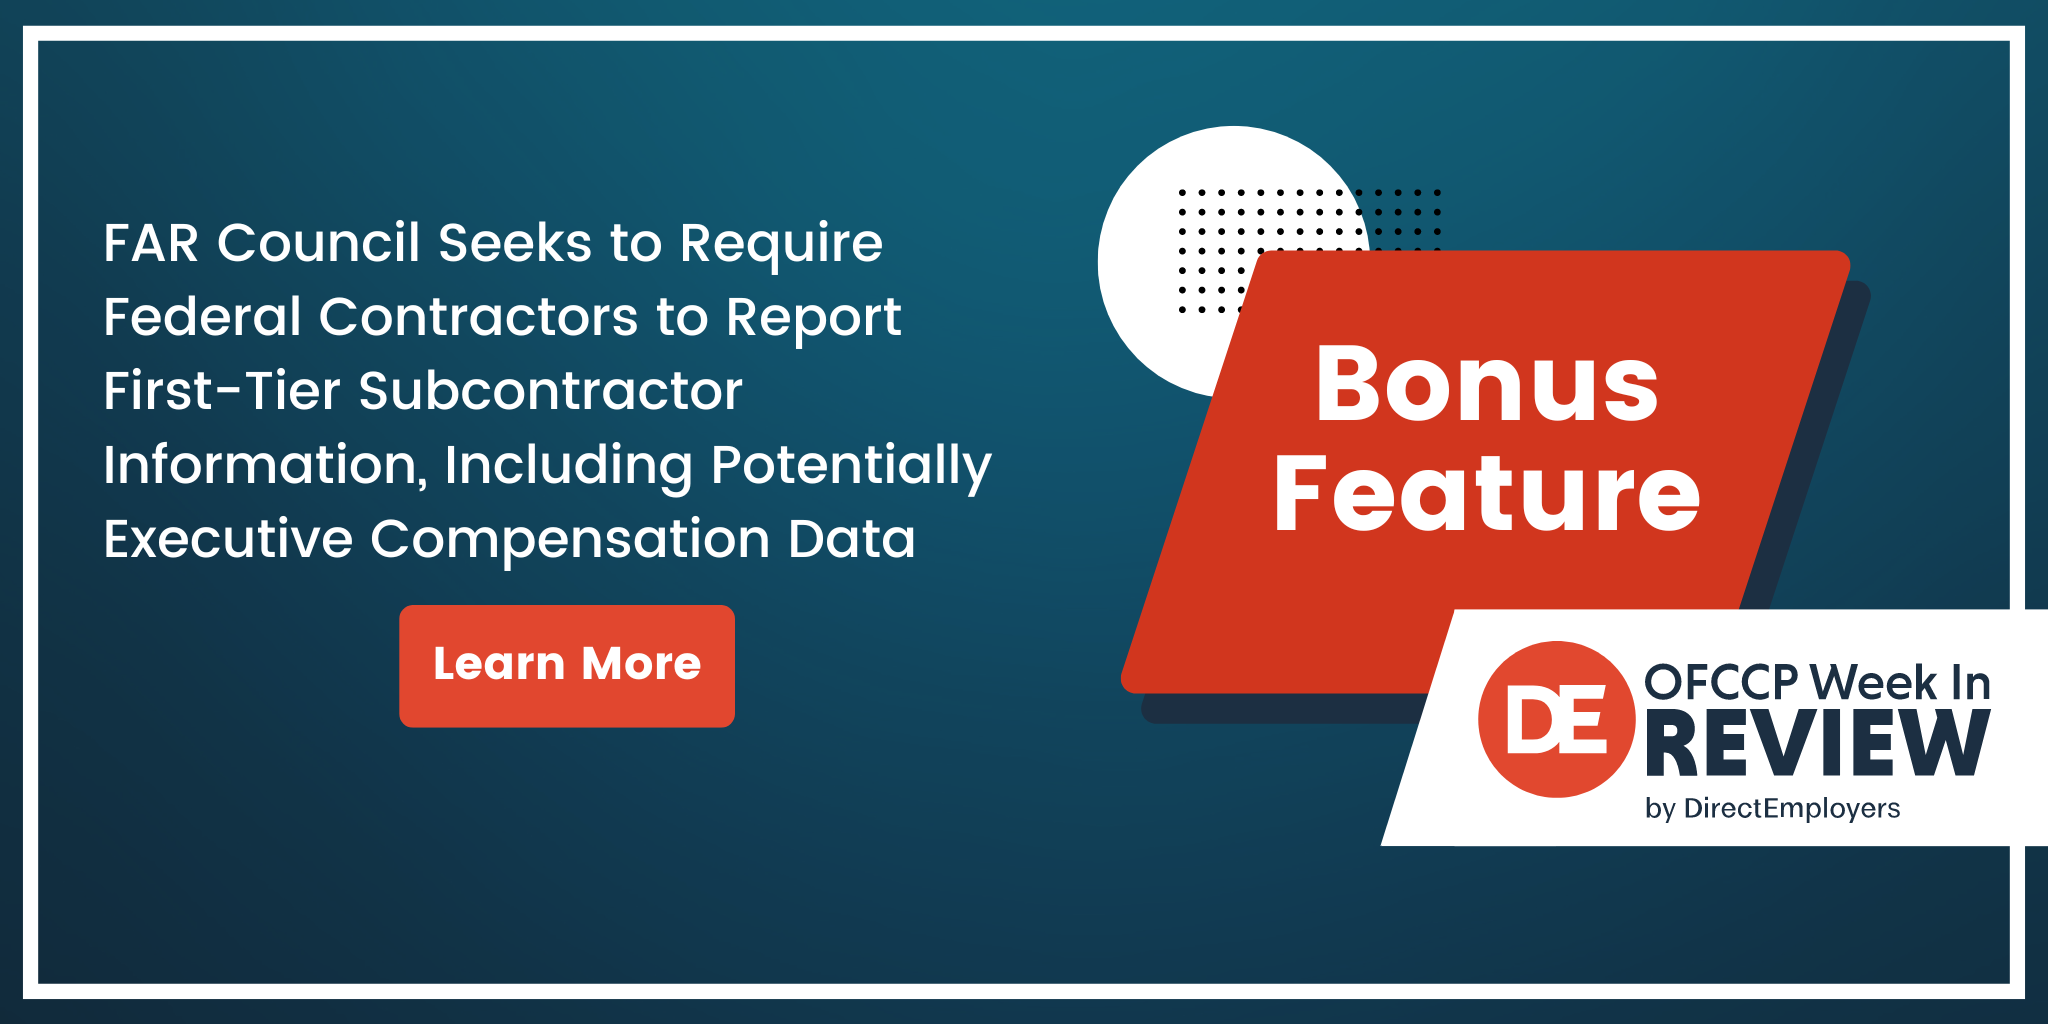 OFCCP Week In Review Bonus Feature | FAR Council Seeks to Require Federal Contractors to Report First-Tier Subcontractor Information, Including Potentially Executive Compensation Data